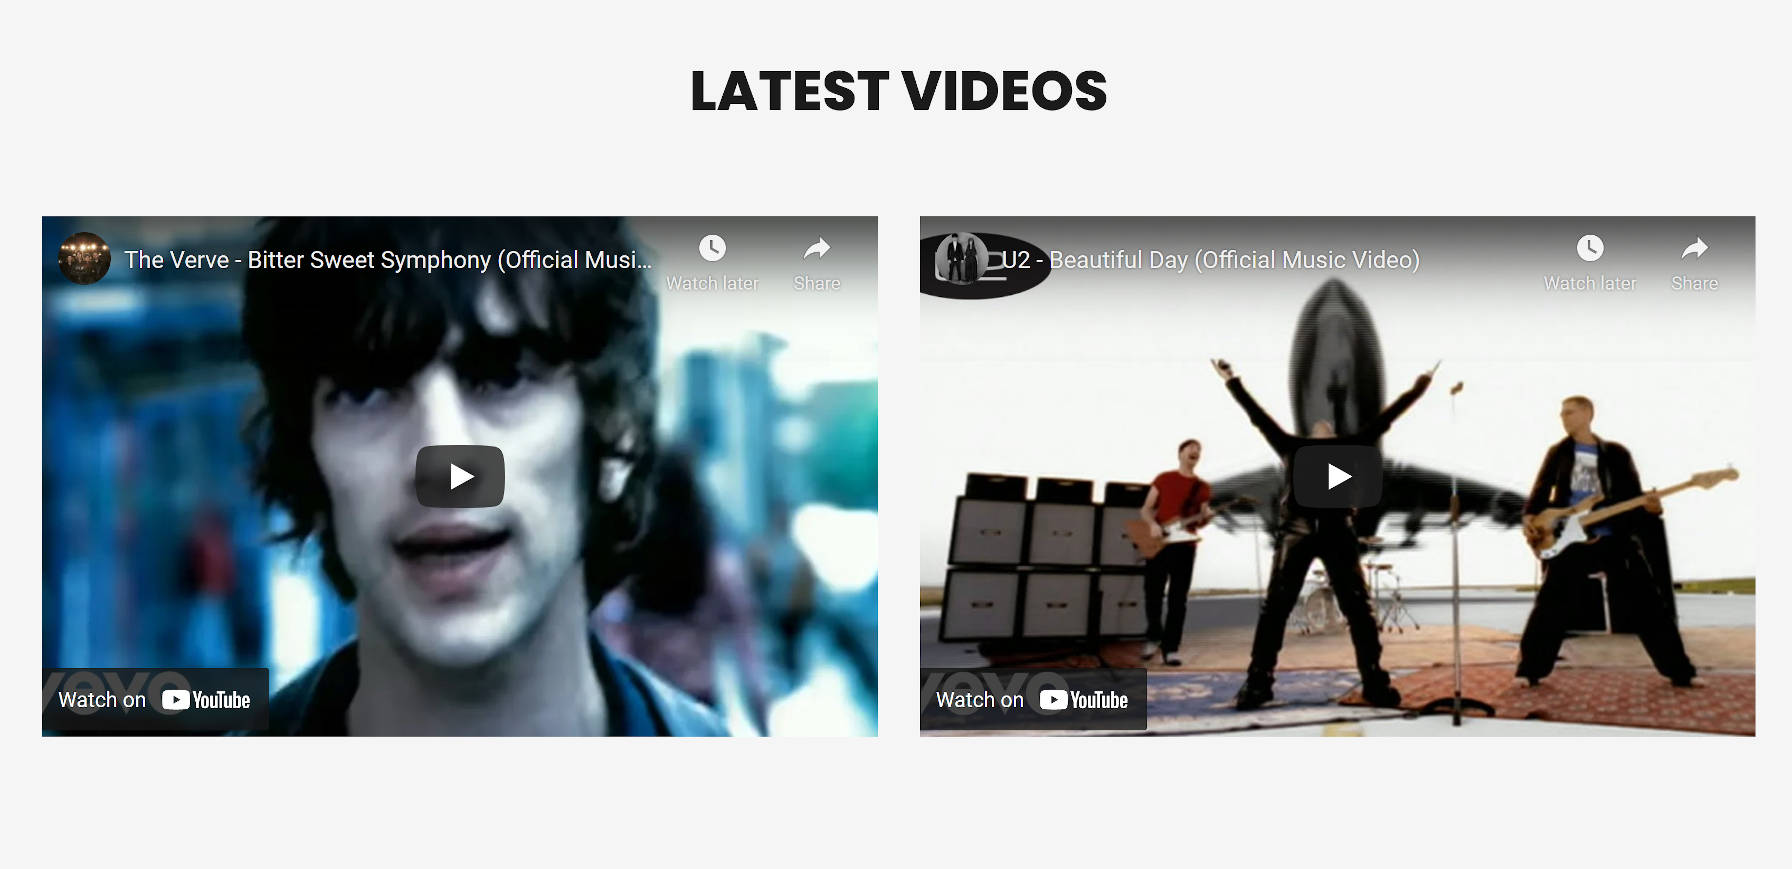 A section with two columns, each with an embedded YouTube video.